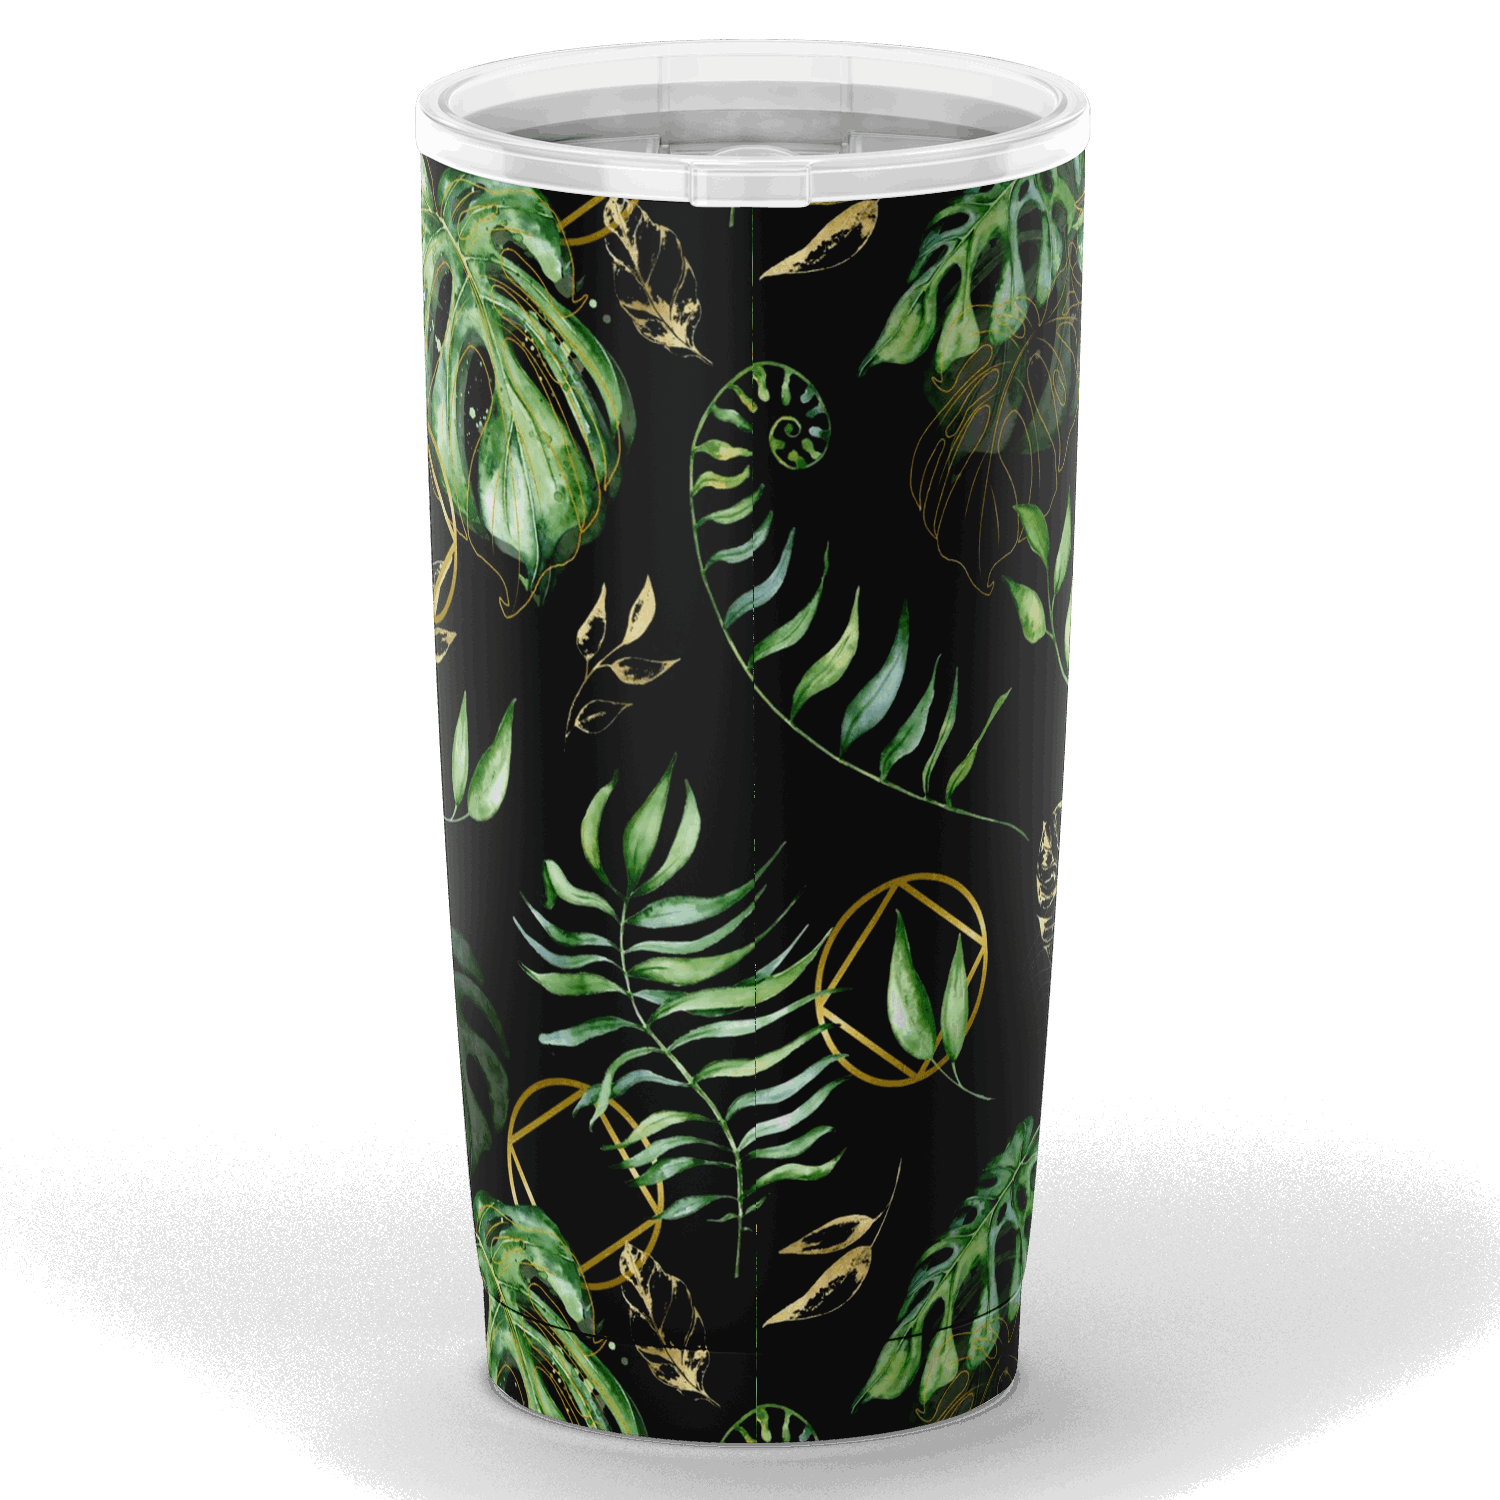 NA Logo Tropical Pattern - Stainless Steel Tumbler